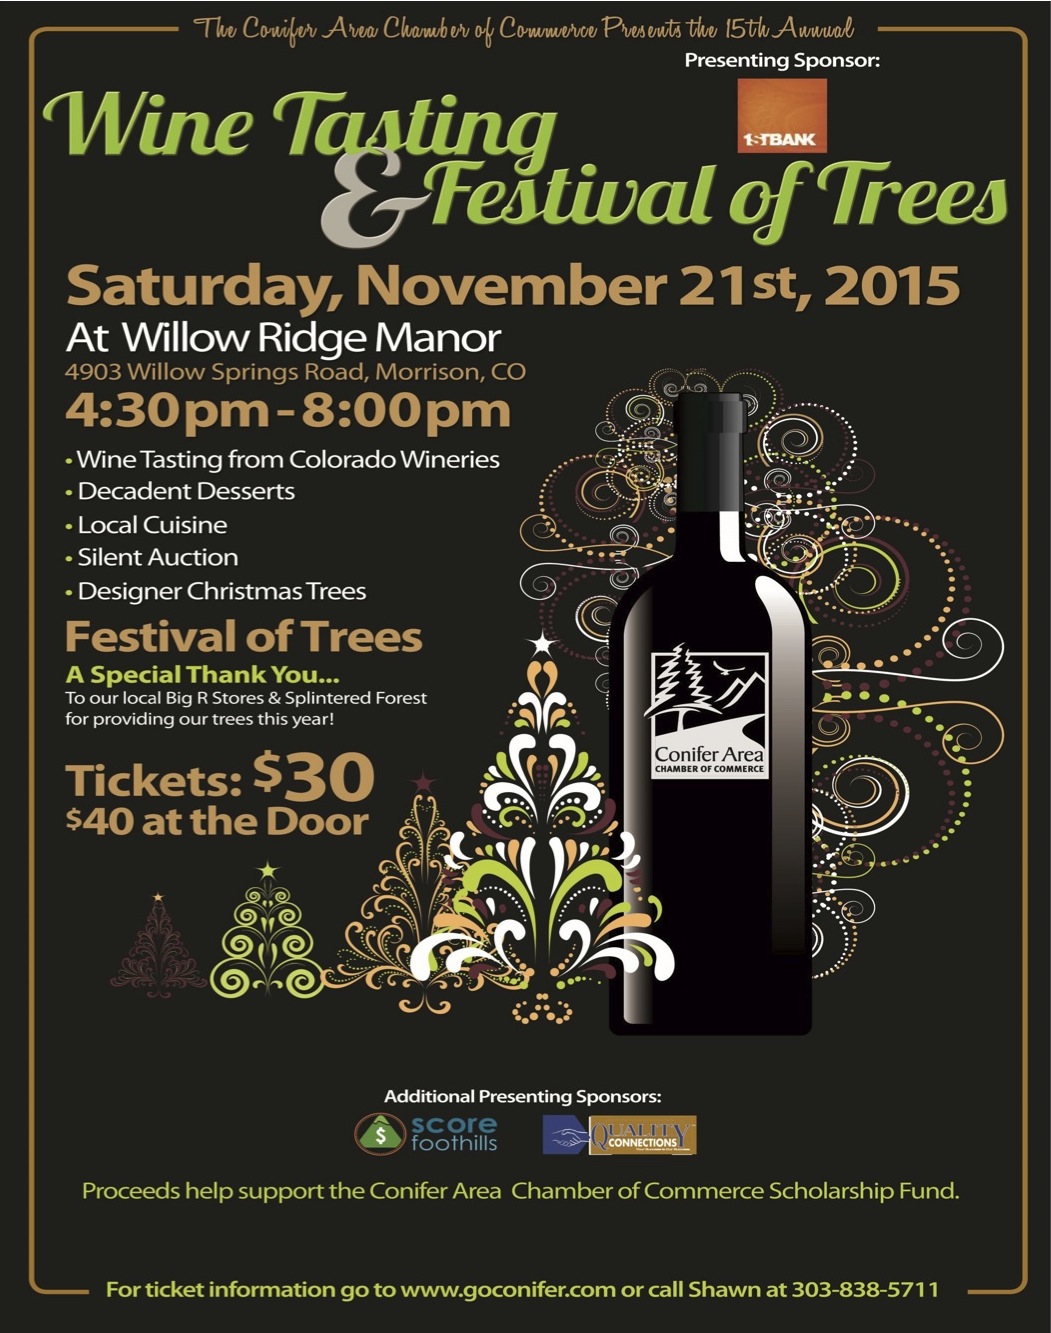 Conifer Area Chamber of Commerce Holiday Wine Tasting and Festival of Trees 2015